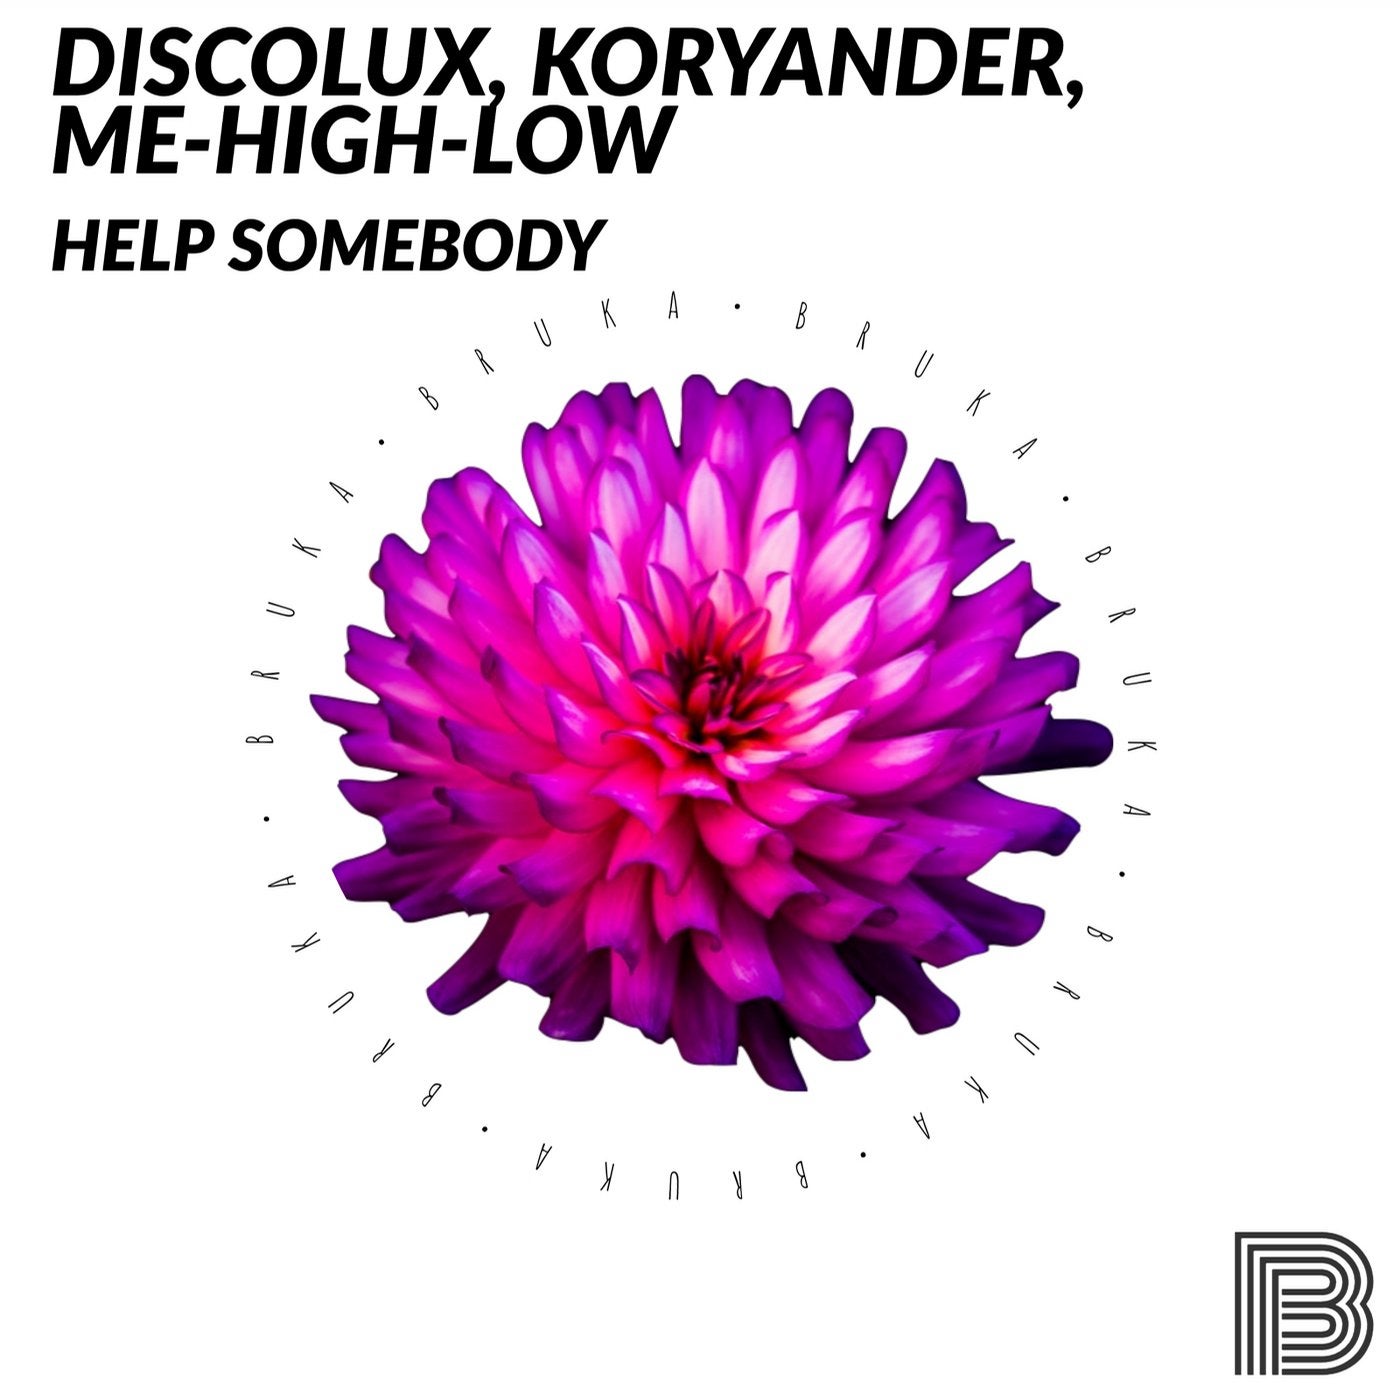 Help Somebody by Me-High-Low, Discolux, Koryander